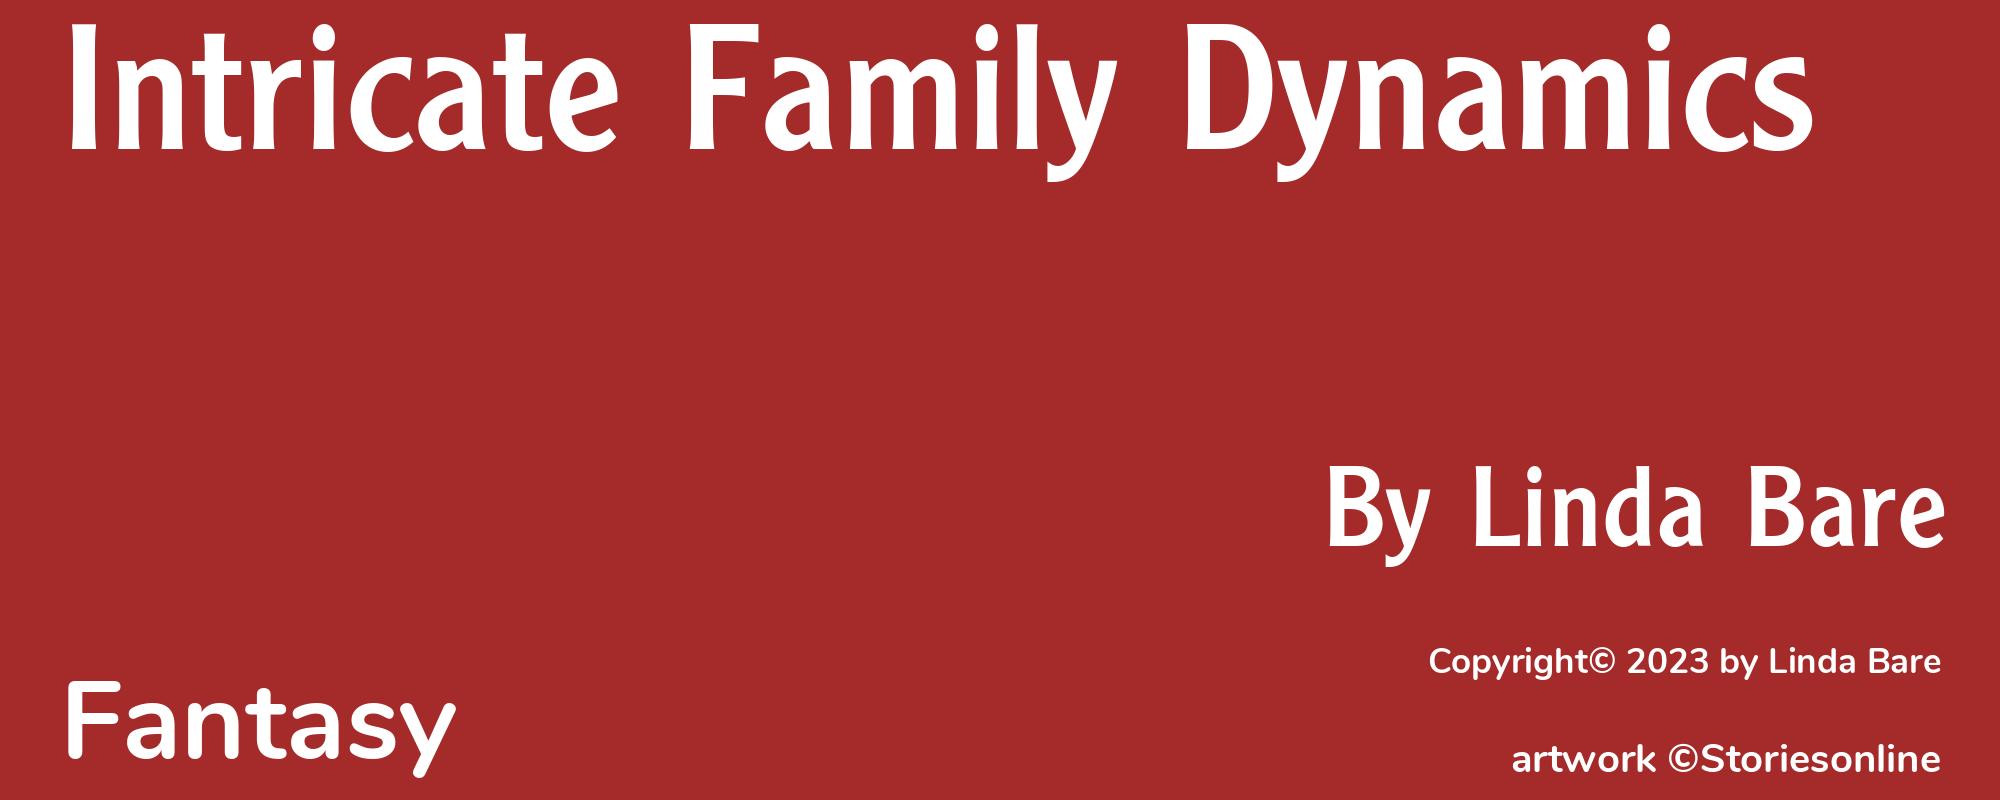 Intricate Family Dynamics - Cover